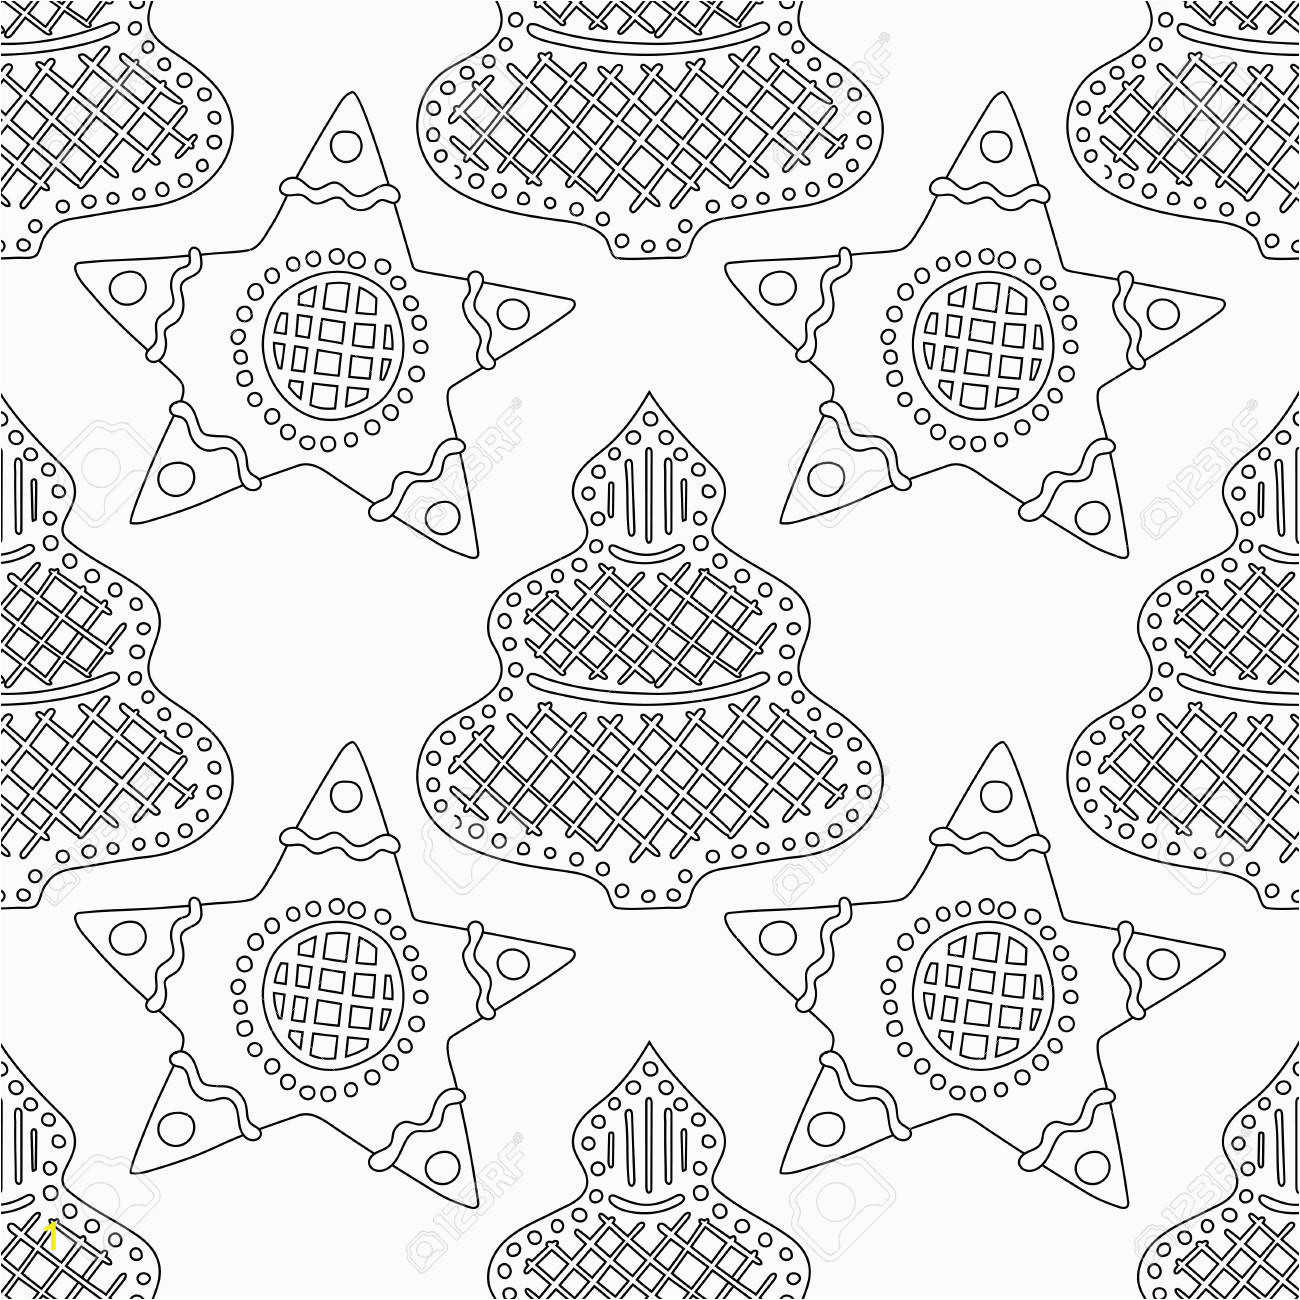 gingerbread black and white illustration for coloring book or page christmas and holiday background